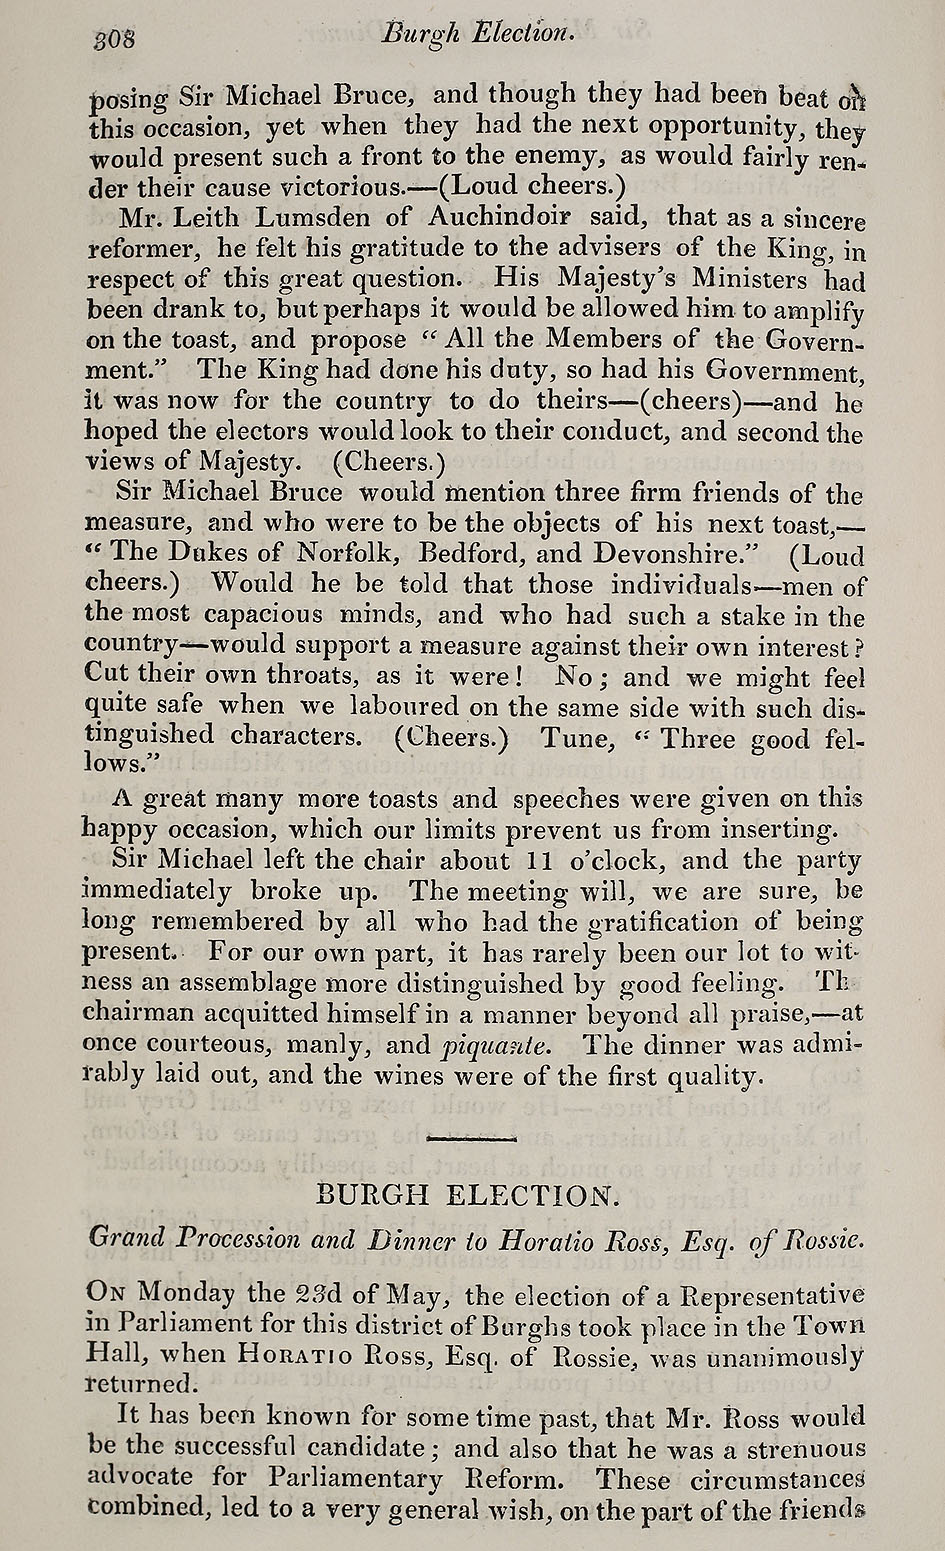 RAD095, The Petition of the Working Classes of Aberdeen and its Vicinity, to the House of Commons; Aberdeen County Election; Sir Michael Bruce's Dinner; Burgh Election; The Dinner